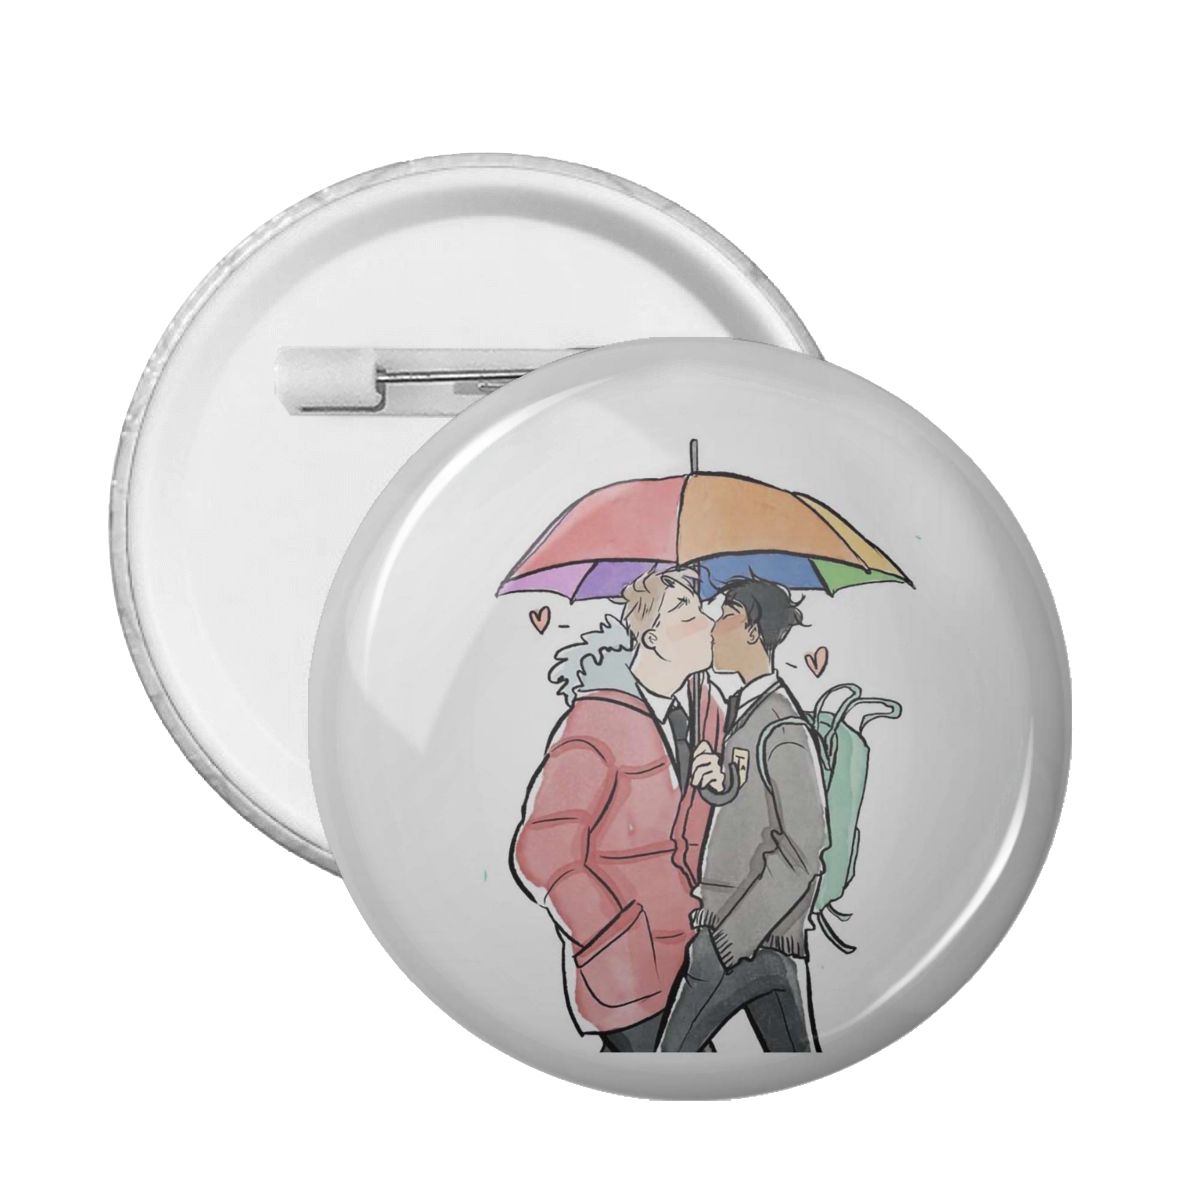 Heartstopper Lbgt Badges Yaoi Boy Love Pins for Clothes Cute Brooches PVC Collar Badge Anime Fans Collections